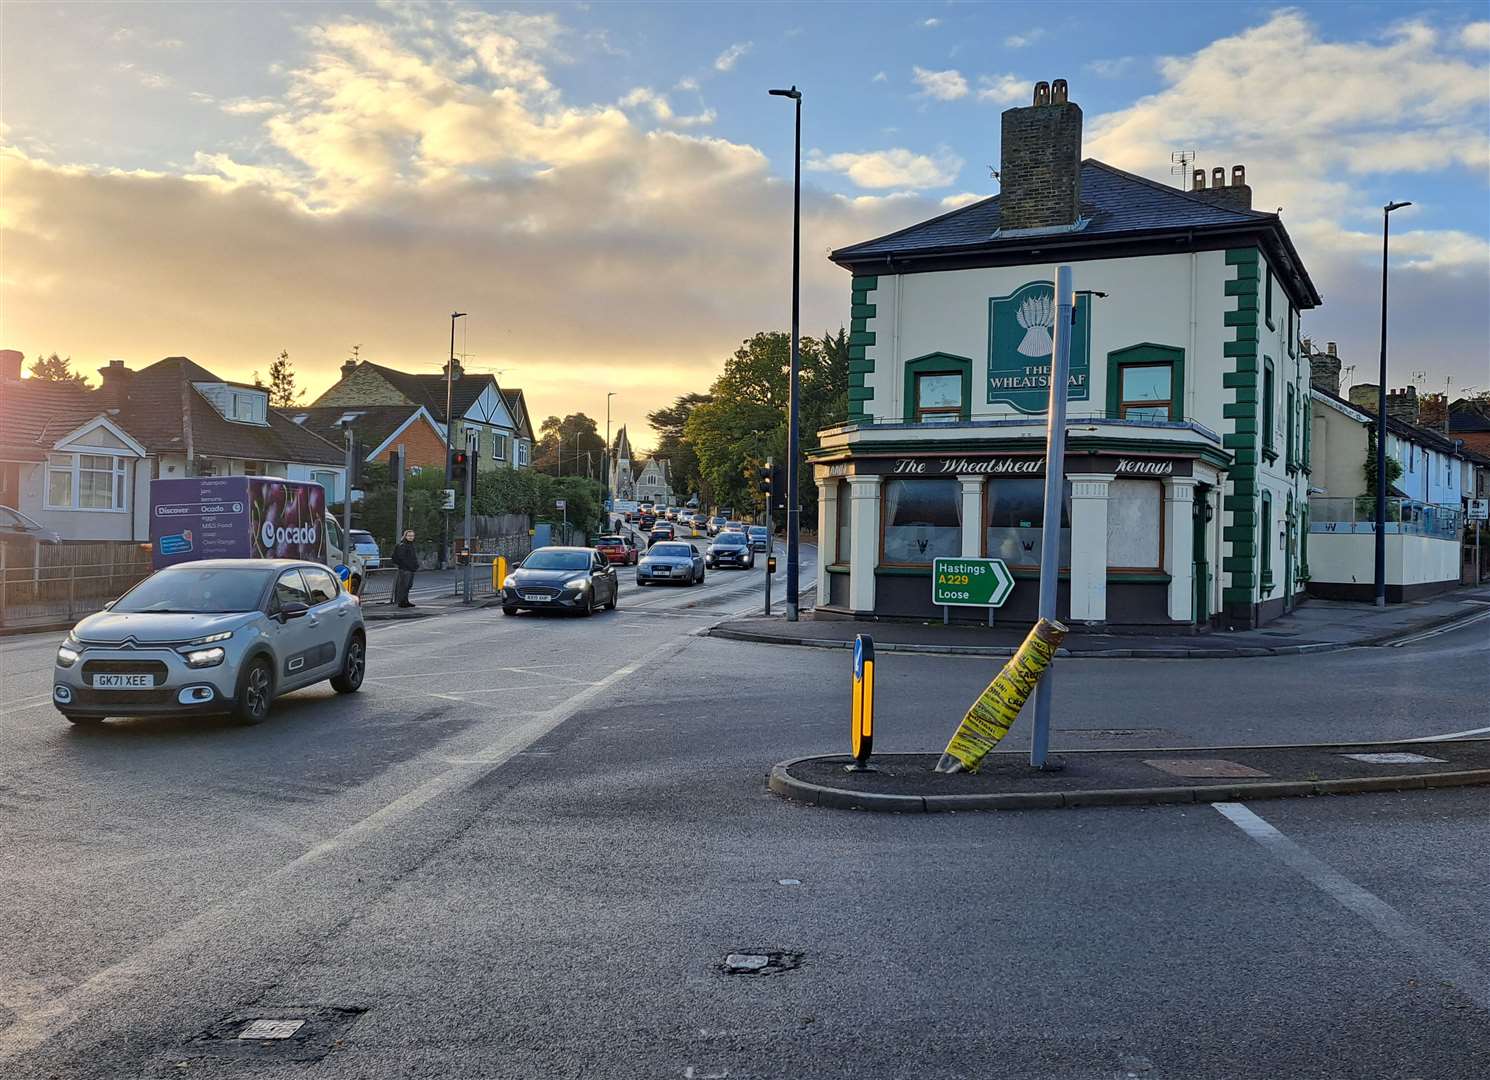 The Wheatsheaf pub has stood empty for five years - the last pint was pulled in January 2019